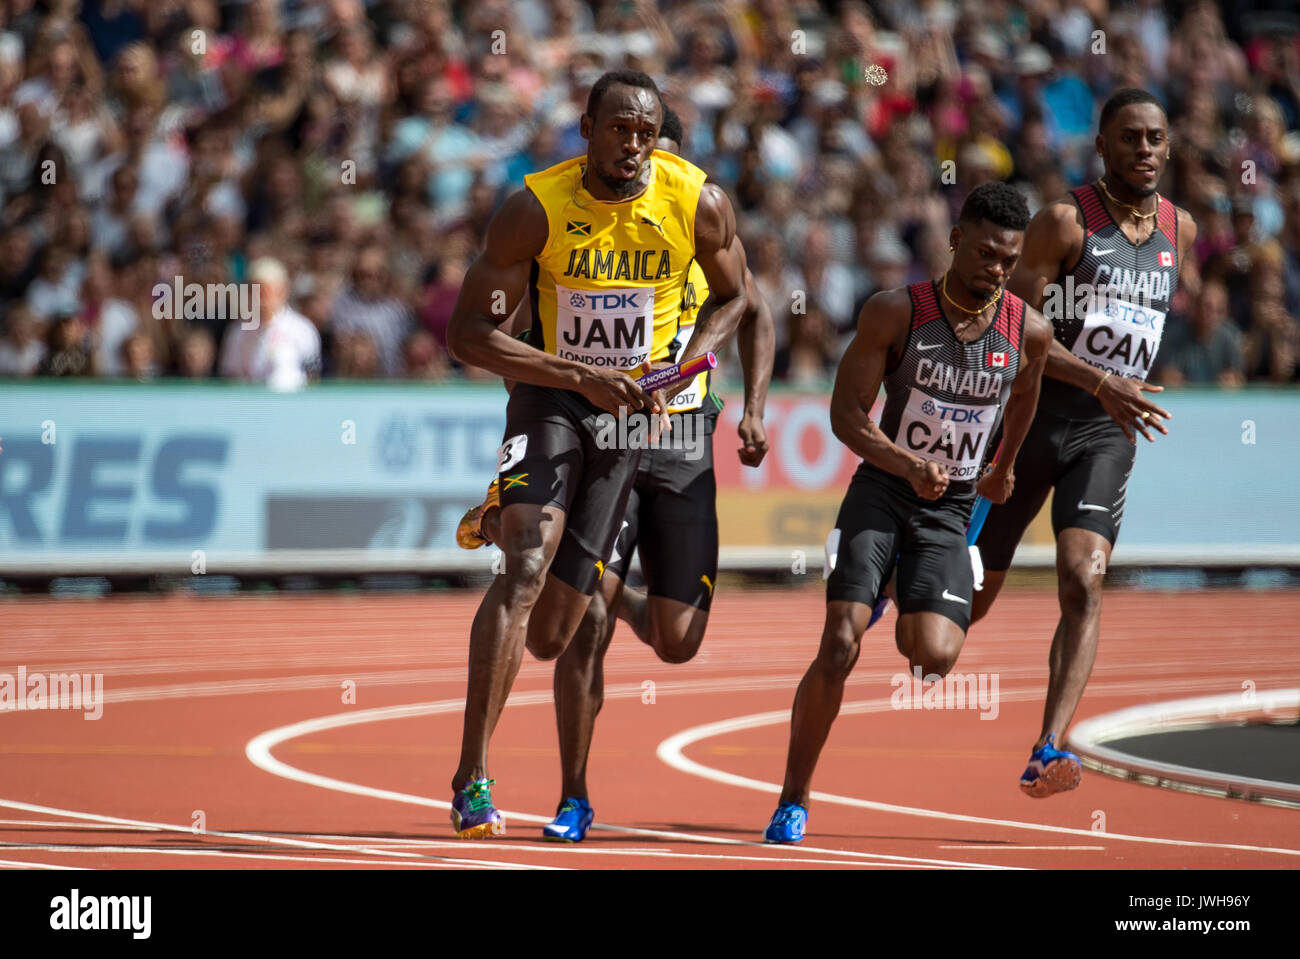 Usain BOLT of Jamaica runs the final leg of the 4x100m heat during the IAAF World Athletics Championships 2017 on DAY 9 at the Olympic Park, London, England on 12 August 2017. Photo by Andy Rowland / PRiME Media Images. Stock Photo